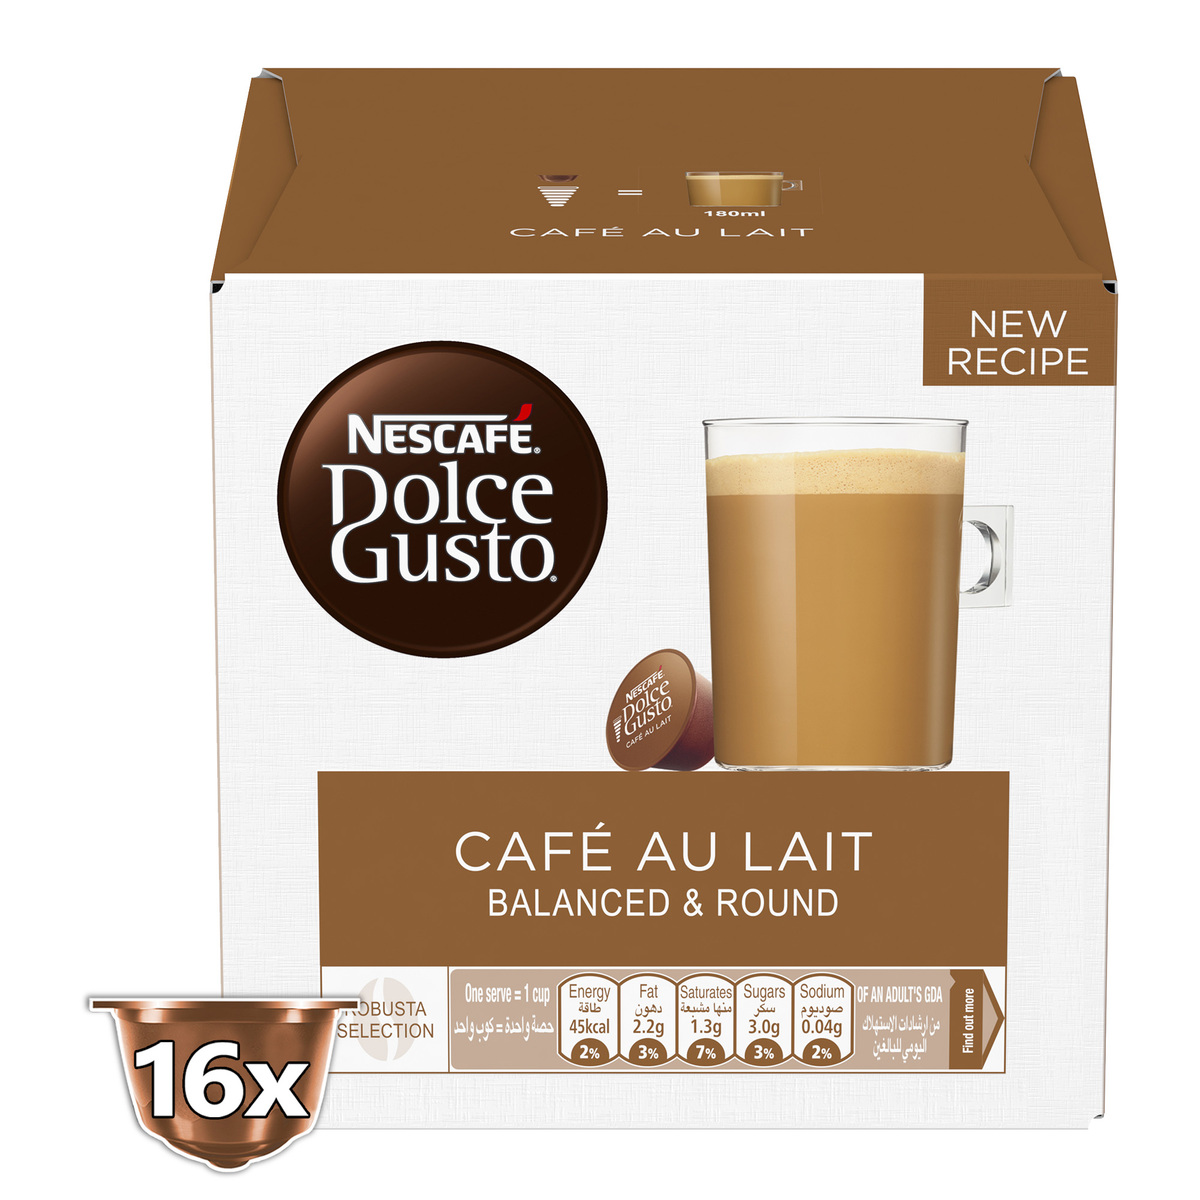 Nescafe Dolce Gusto Cafe Au Lait Capsules 16 Teabags